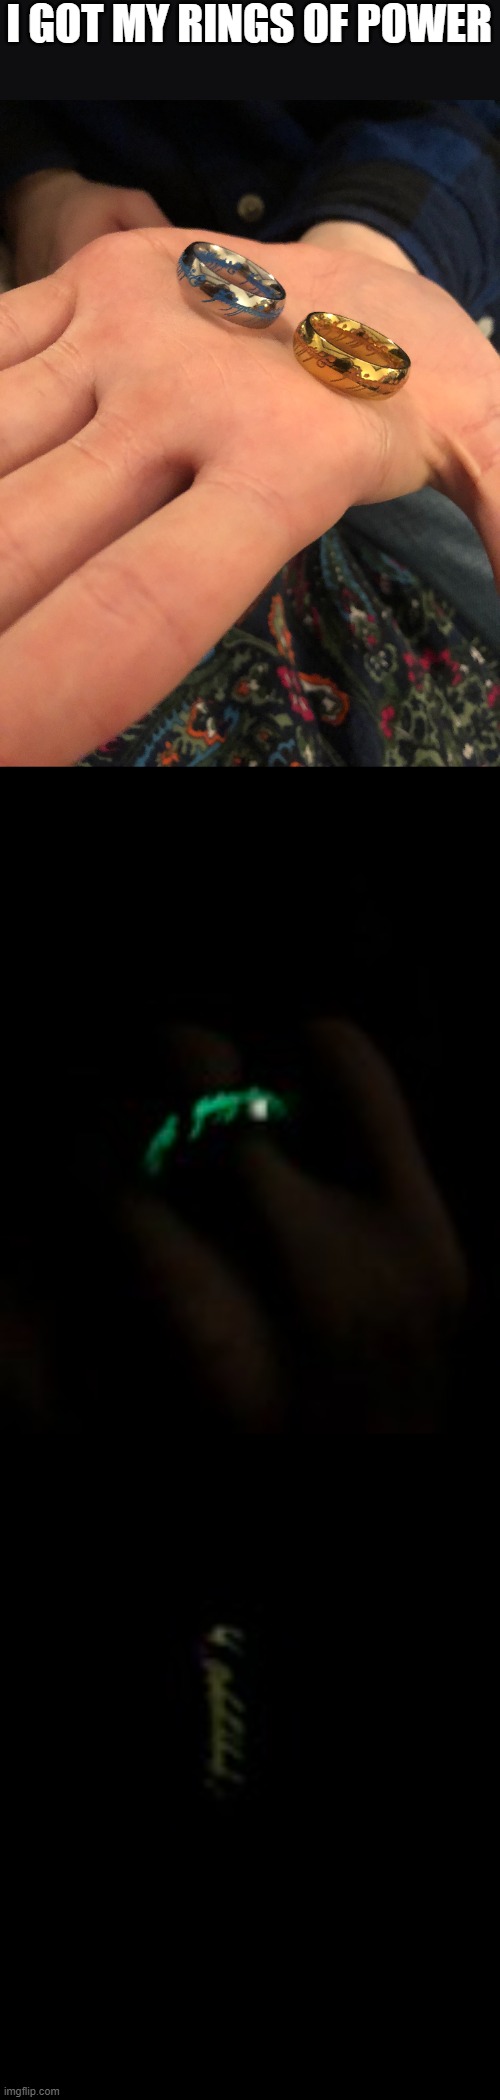 The One Ring from the LOTR and The New Ring from Shadow of Mordor & Shadow of War | I GOT MY RINGS OF POWER | made w/ Imgflip meme maker